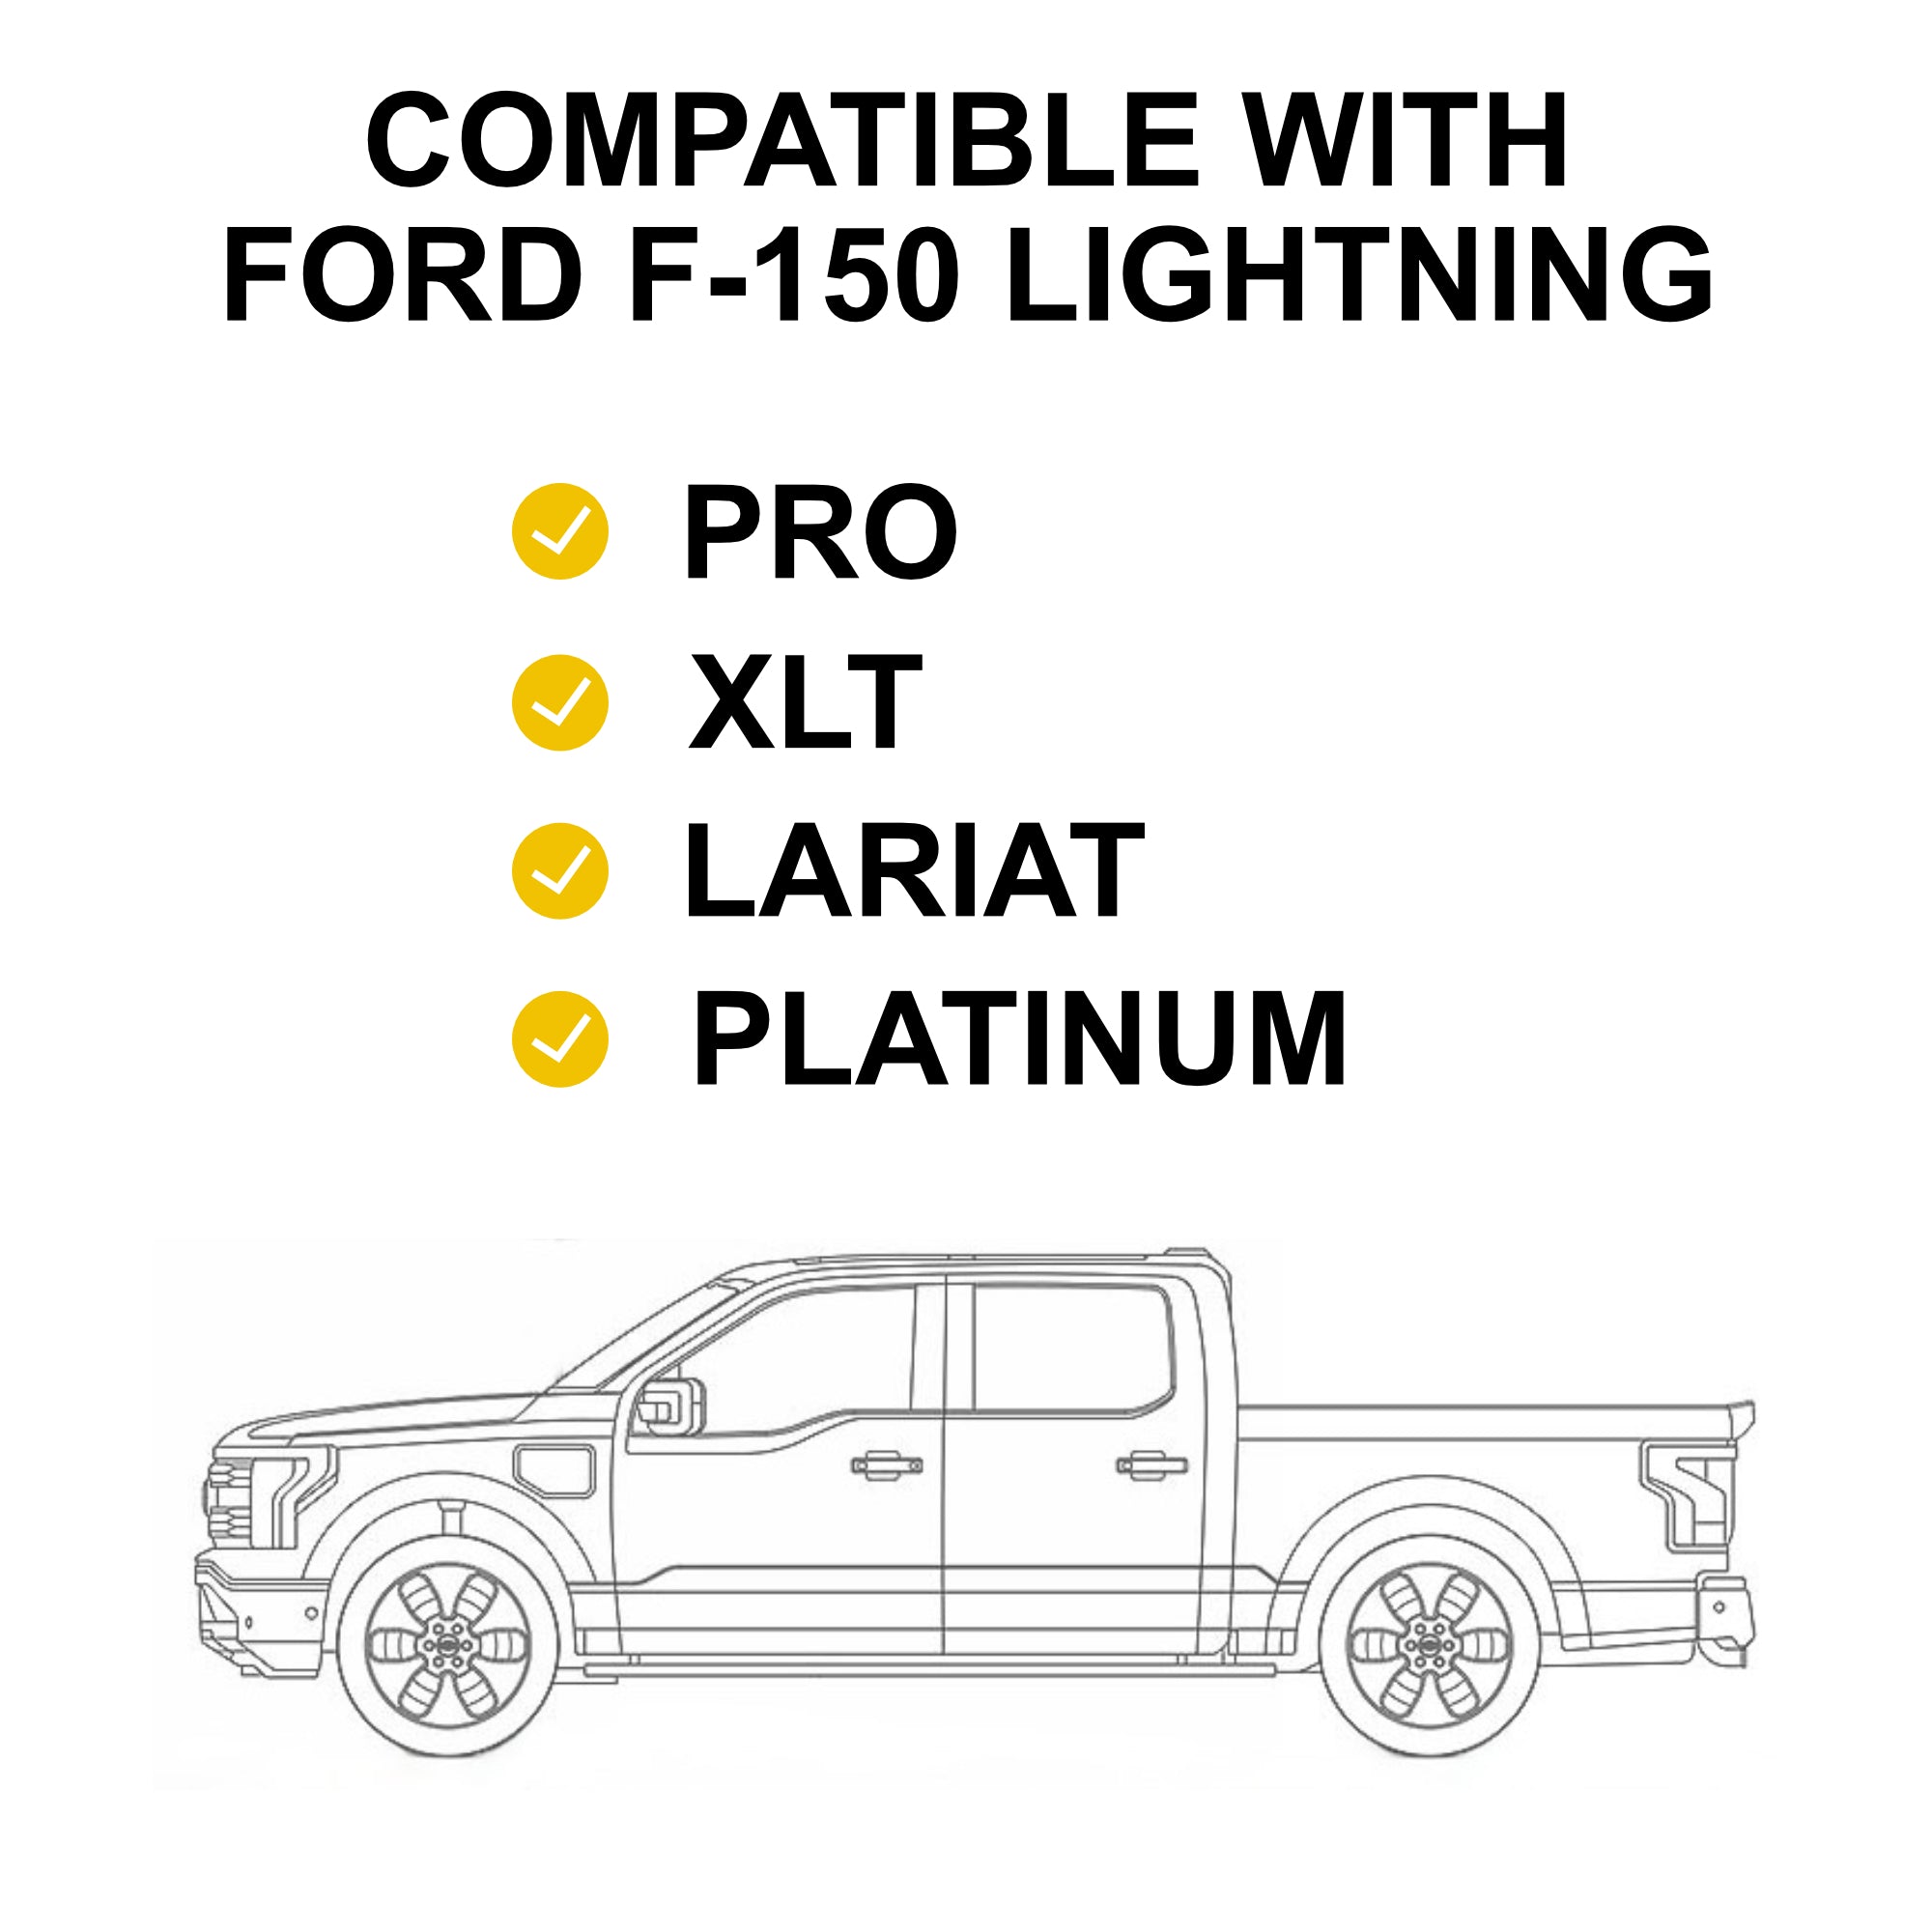 Mini Hood Clear Protection Film (PPF) for Ford F-150 Lightning